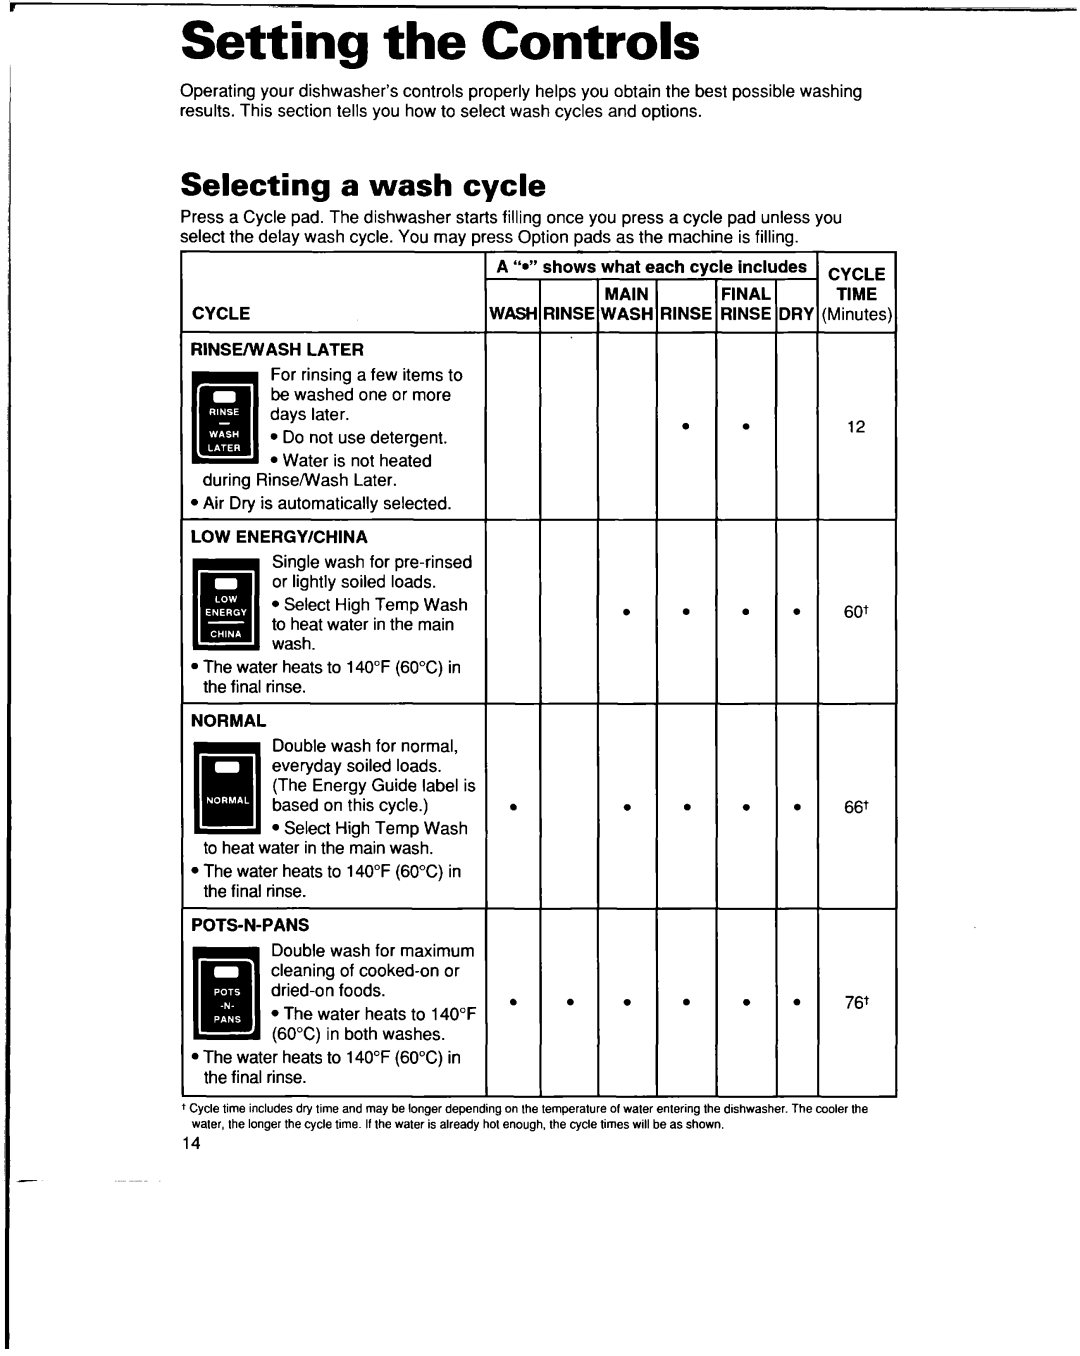 Whirlpool 930 Series Setting the Controls, Selecting a wash cycle, Cycle Rinse/Wash Later, Low Energy/China, Normal, i!ii 